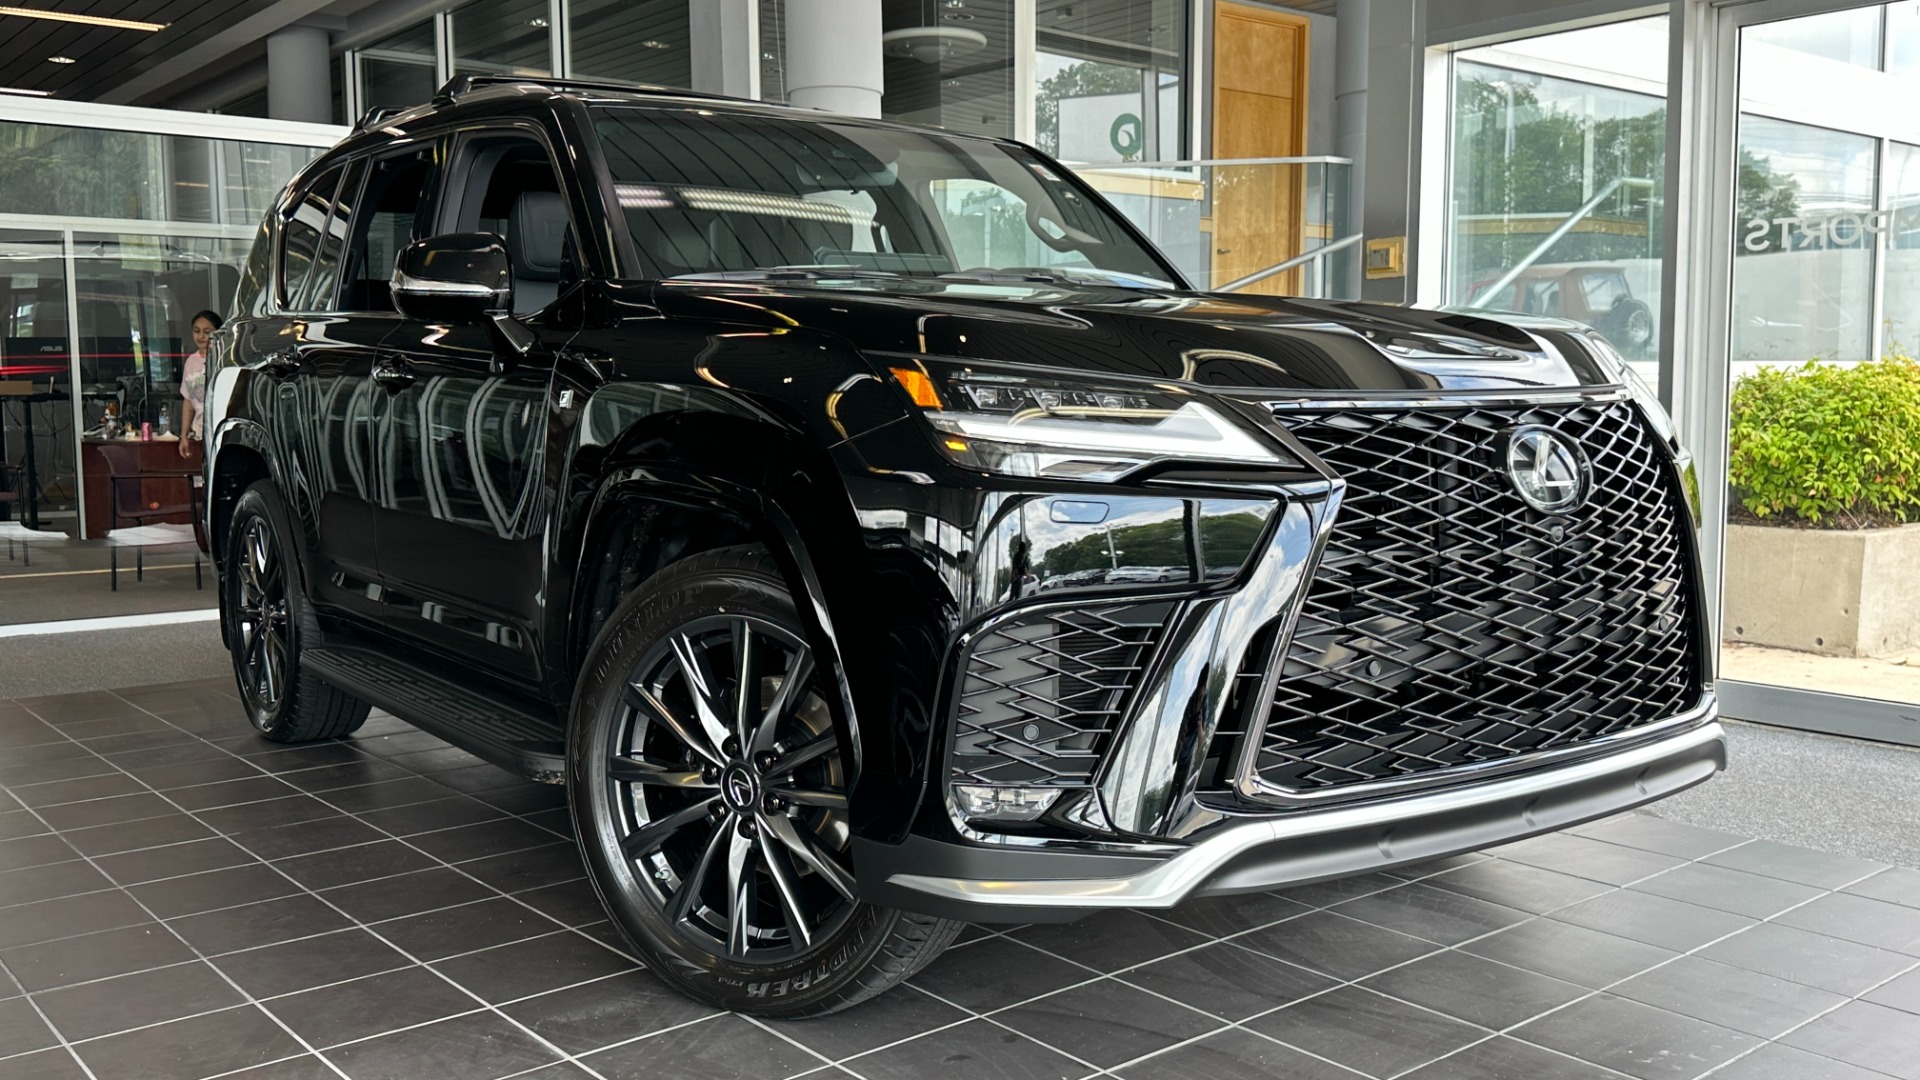 Used 2023 Lexus LX LX 600 F SPORT / MARK LEVINSON / HEIGHT CONTROL / CROSS BARS for sale $138,499 at Formula Imports in Charlotte NC 28227 7